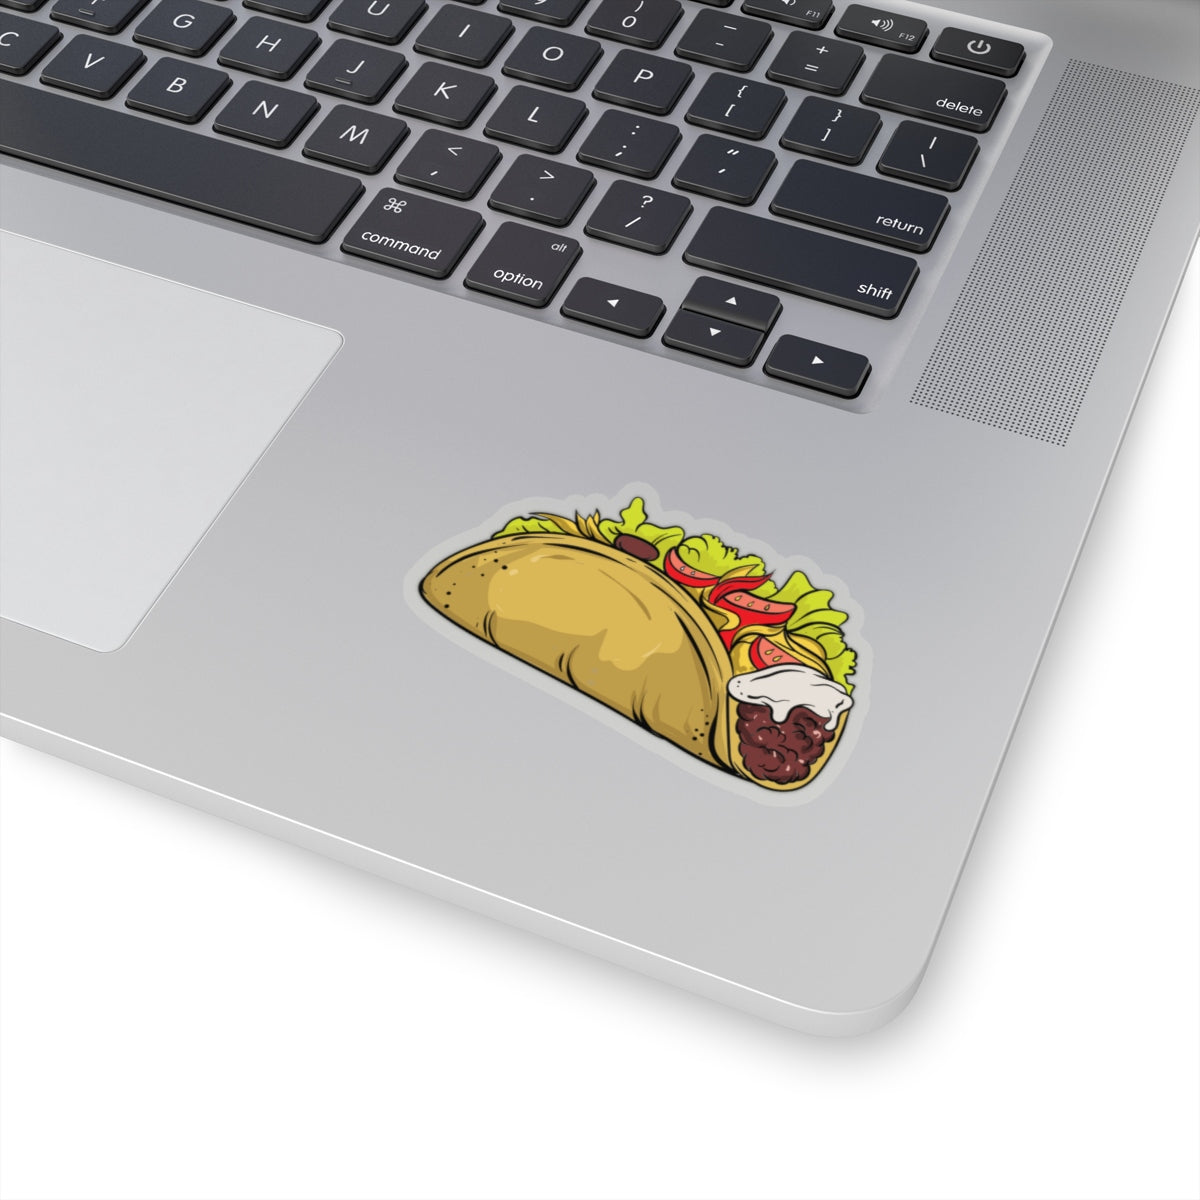 Taco Sticker Decal, Mexican Food Taco Love Funny Lover Laptop Decal Vinyl Cute Waterbottle Tumbler Car Bumper Aesthetic Wall Mural Starcove Fashion